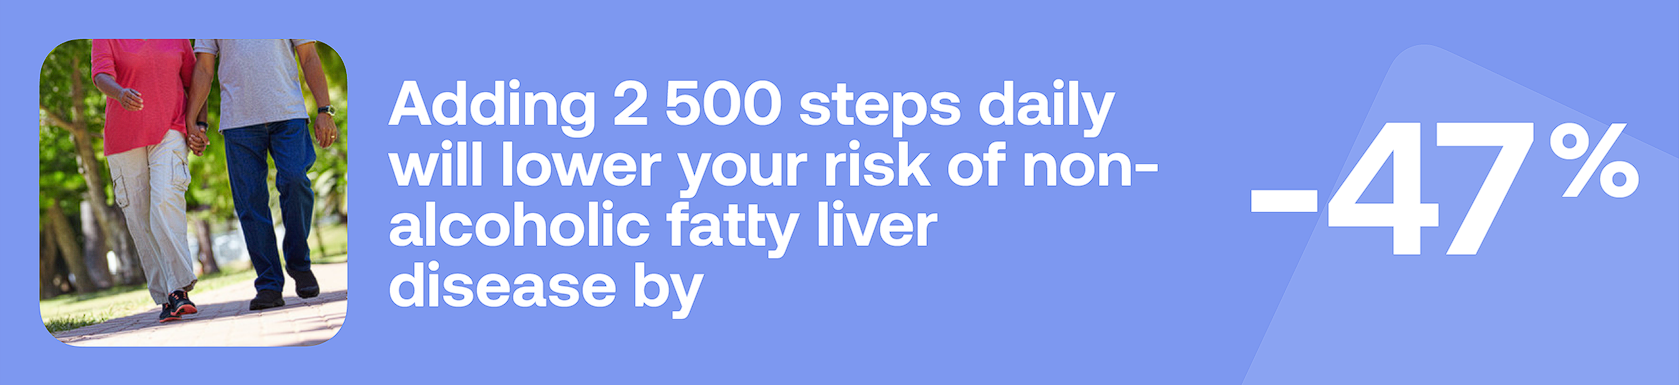 Adding 2500 steps daily will lower your risk of non-alcoholic fatty liver disease by -47%